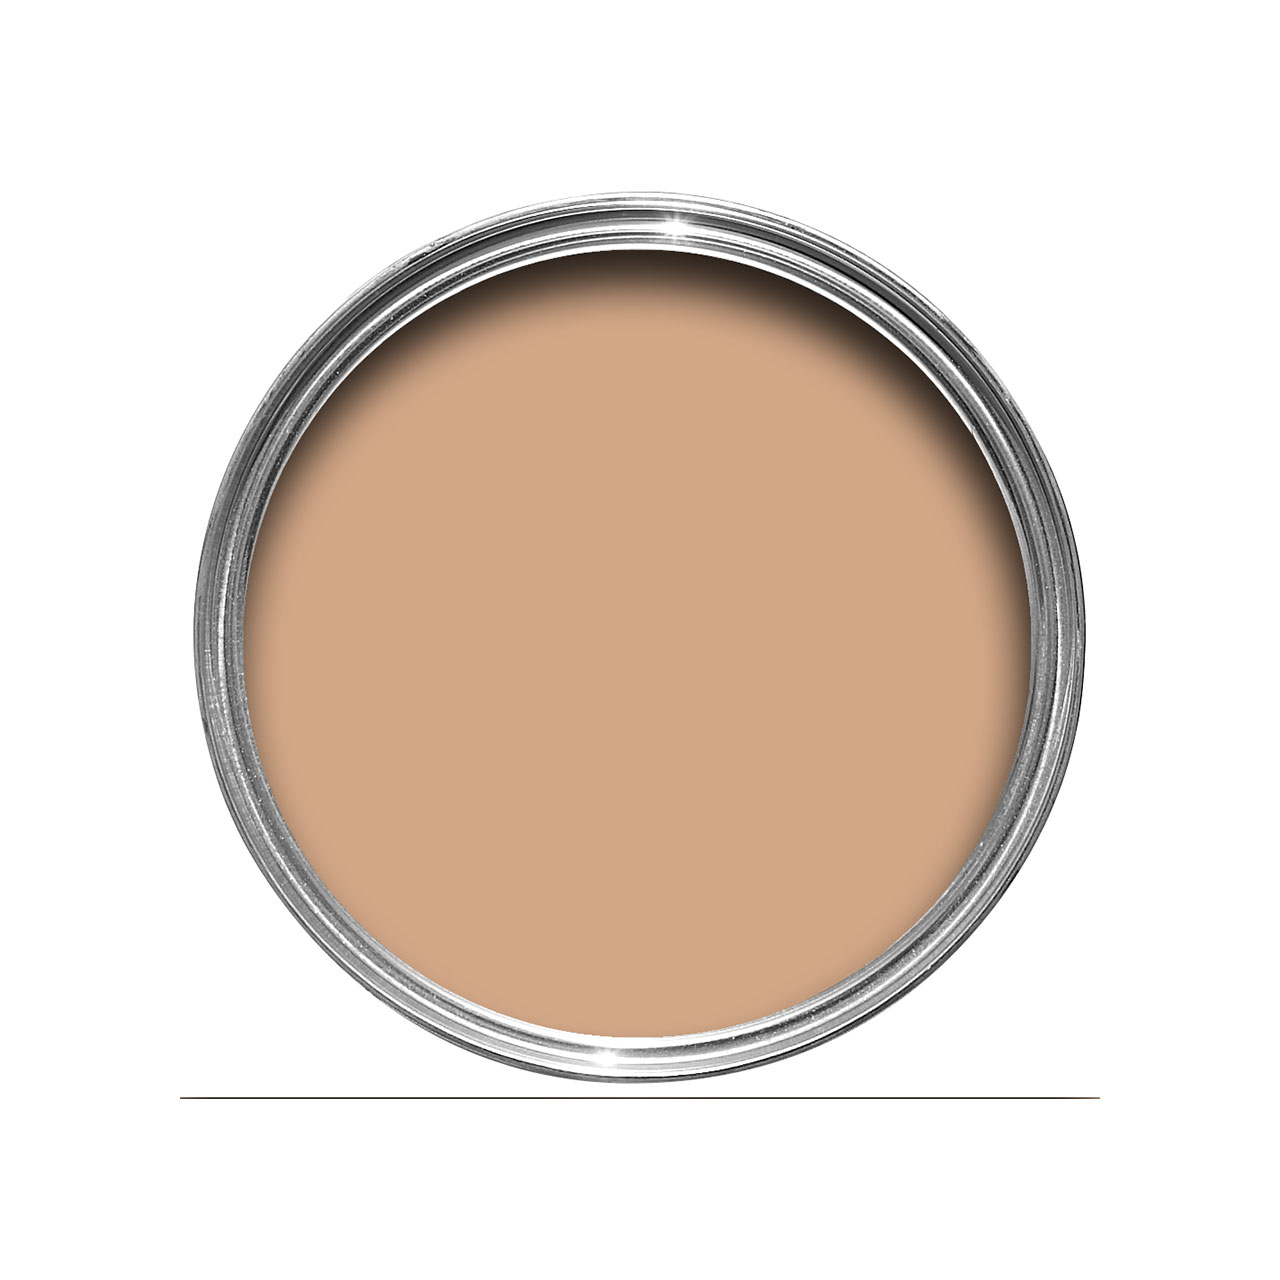 Archive Collection: Fake Tan (9912)